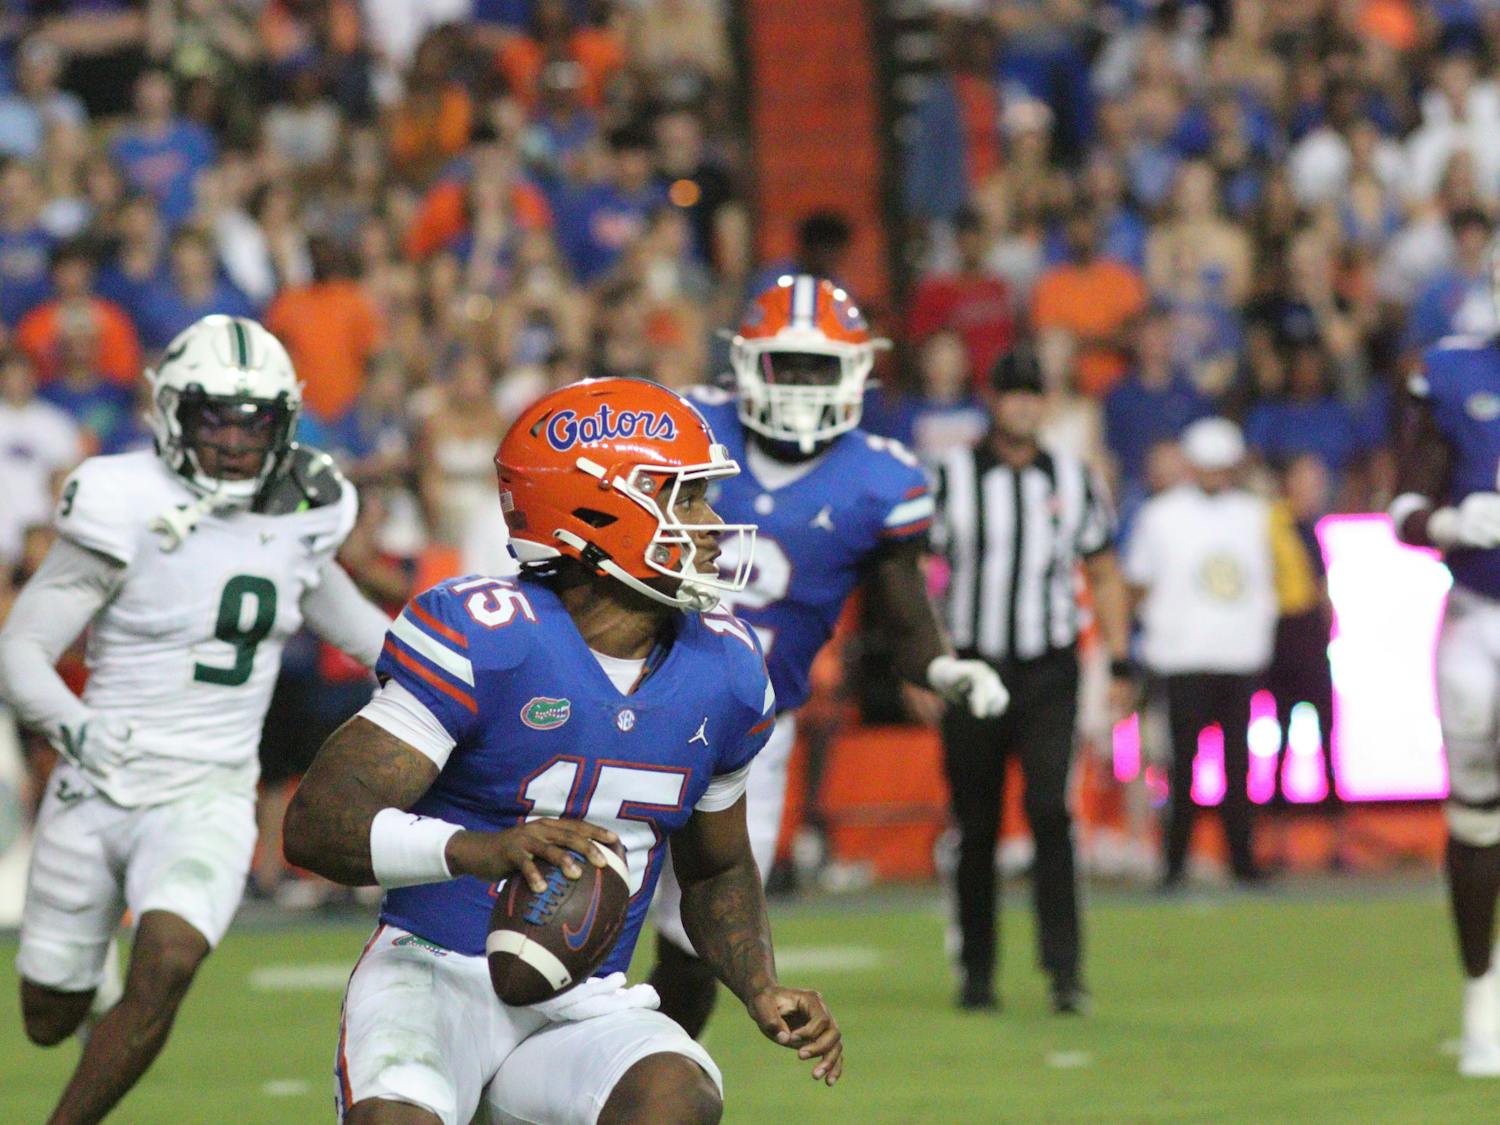 Florida quarterback Anthony Richardson throws the ball during the Gators' 31-28 win over the South Florida Bulls Saturday, Sept. 17, 2022.